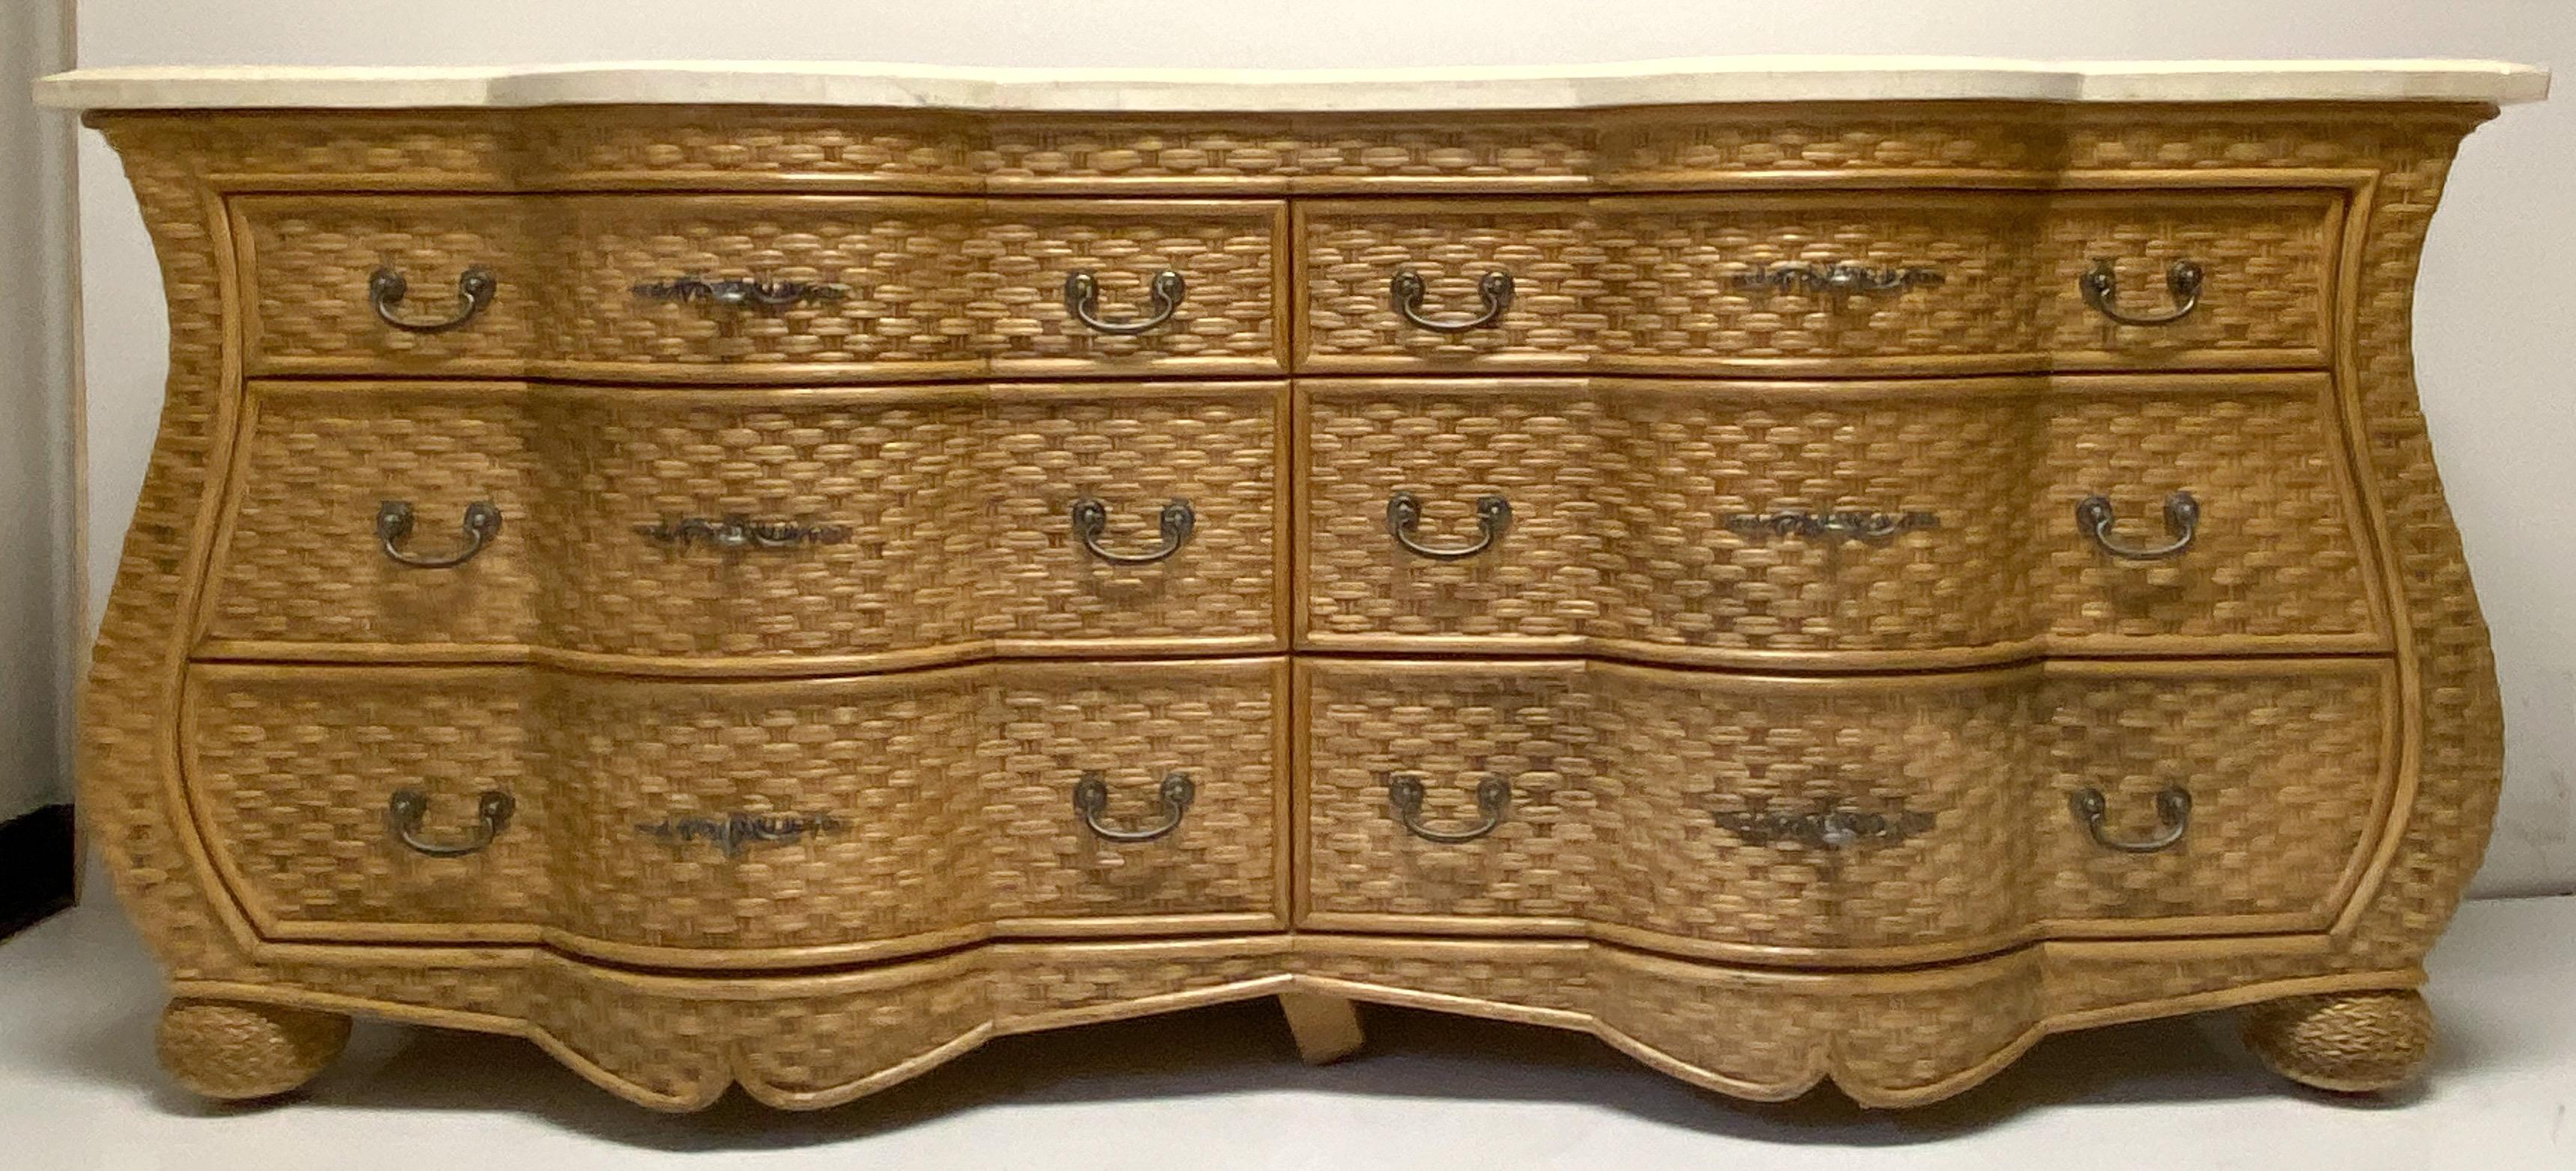 This is a wicker serpentine chest by WhiteCraft for Woodard. It has a travertine top that is not affixed to the piece. Note the fun wicker bun feet!.